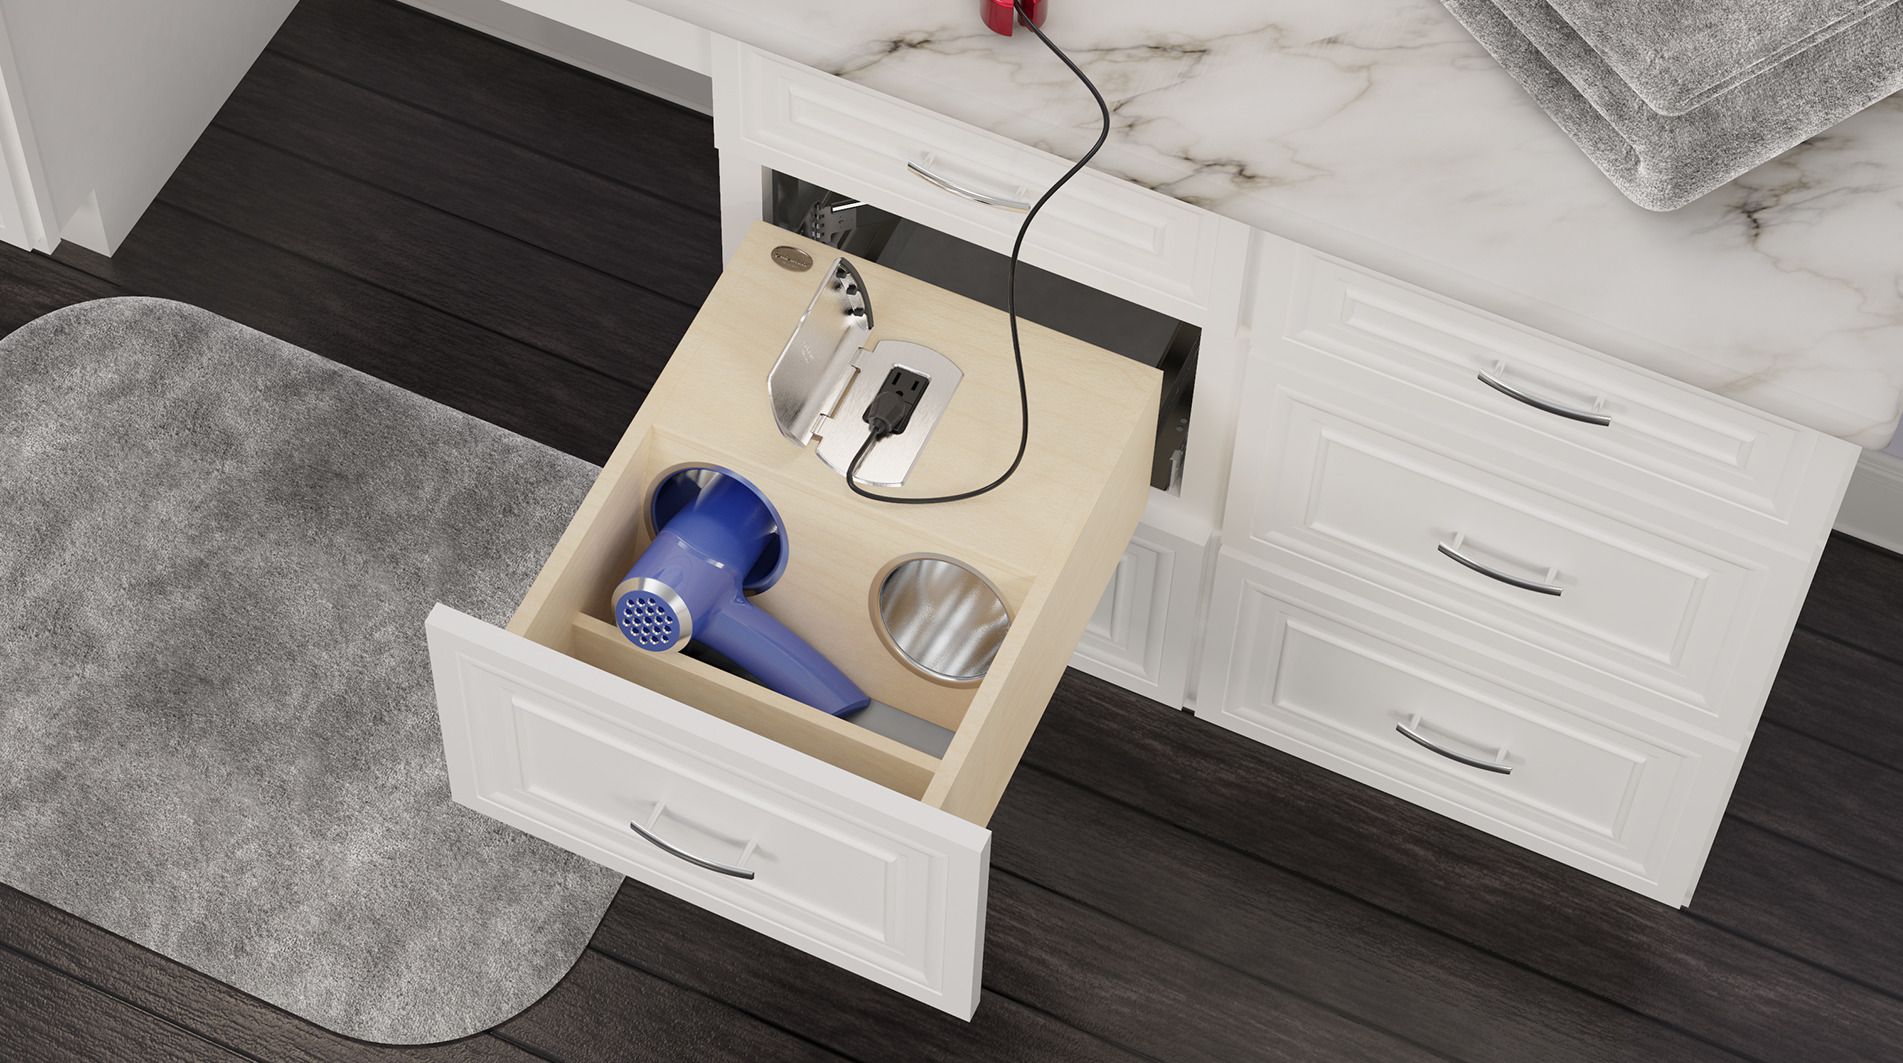 Maximize bathroom storage with a Rev-a-shalf outlet drawer